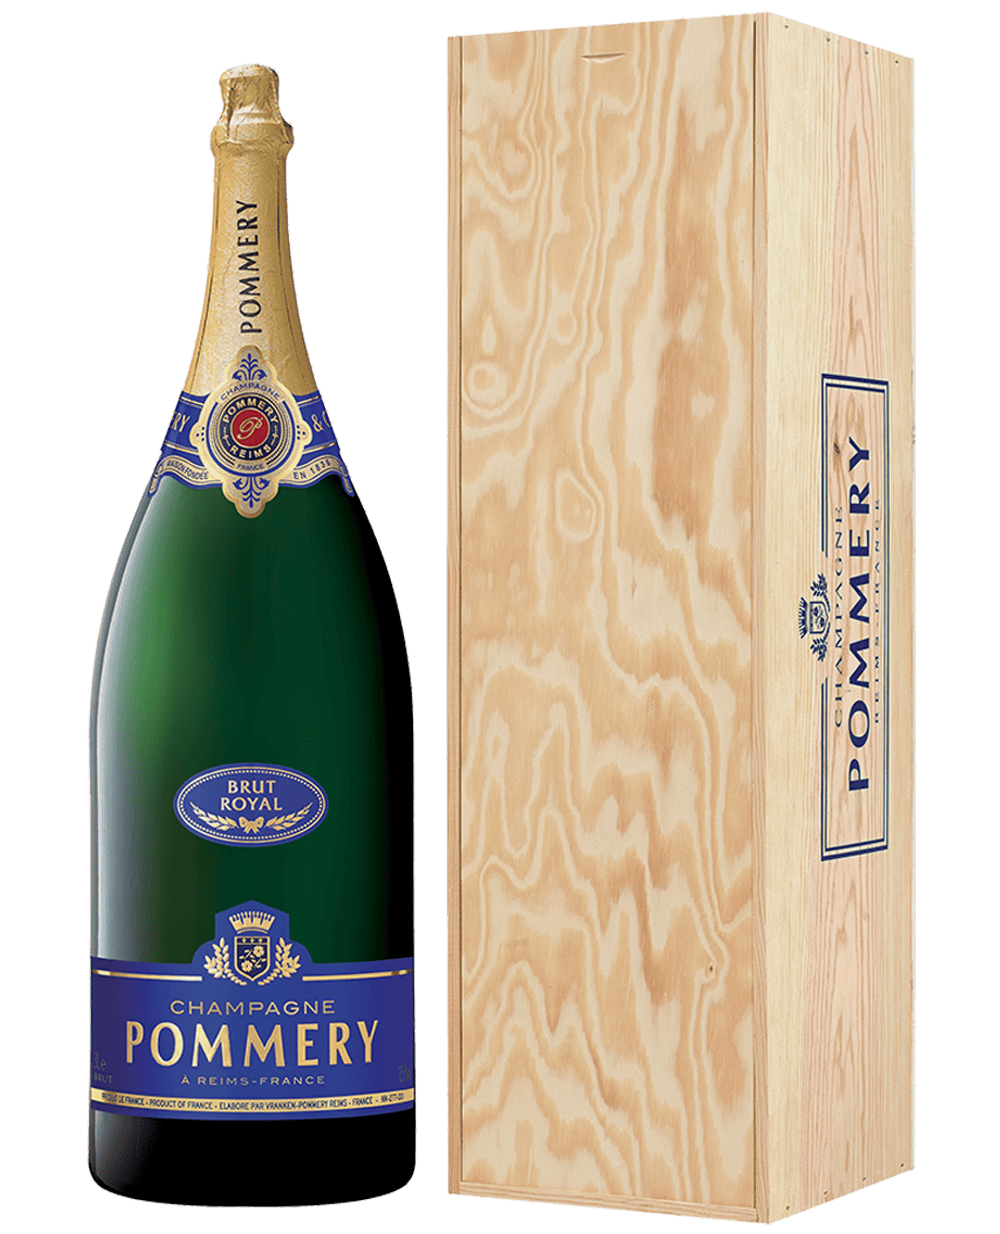 Balthazar of Pommery Brut Royal 1200cl with wooden box